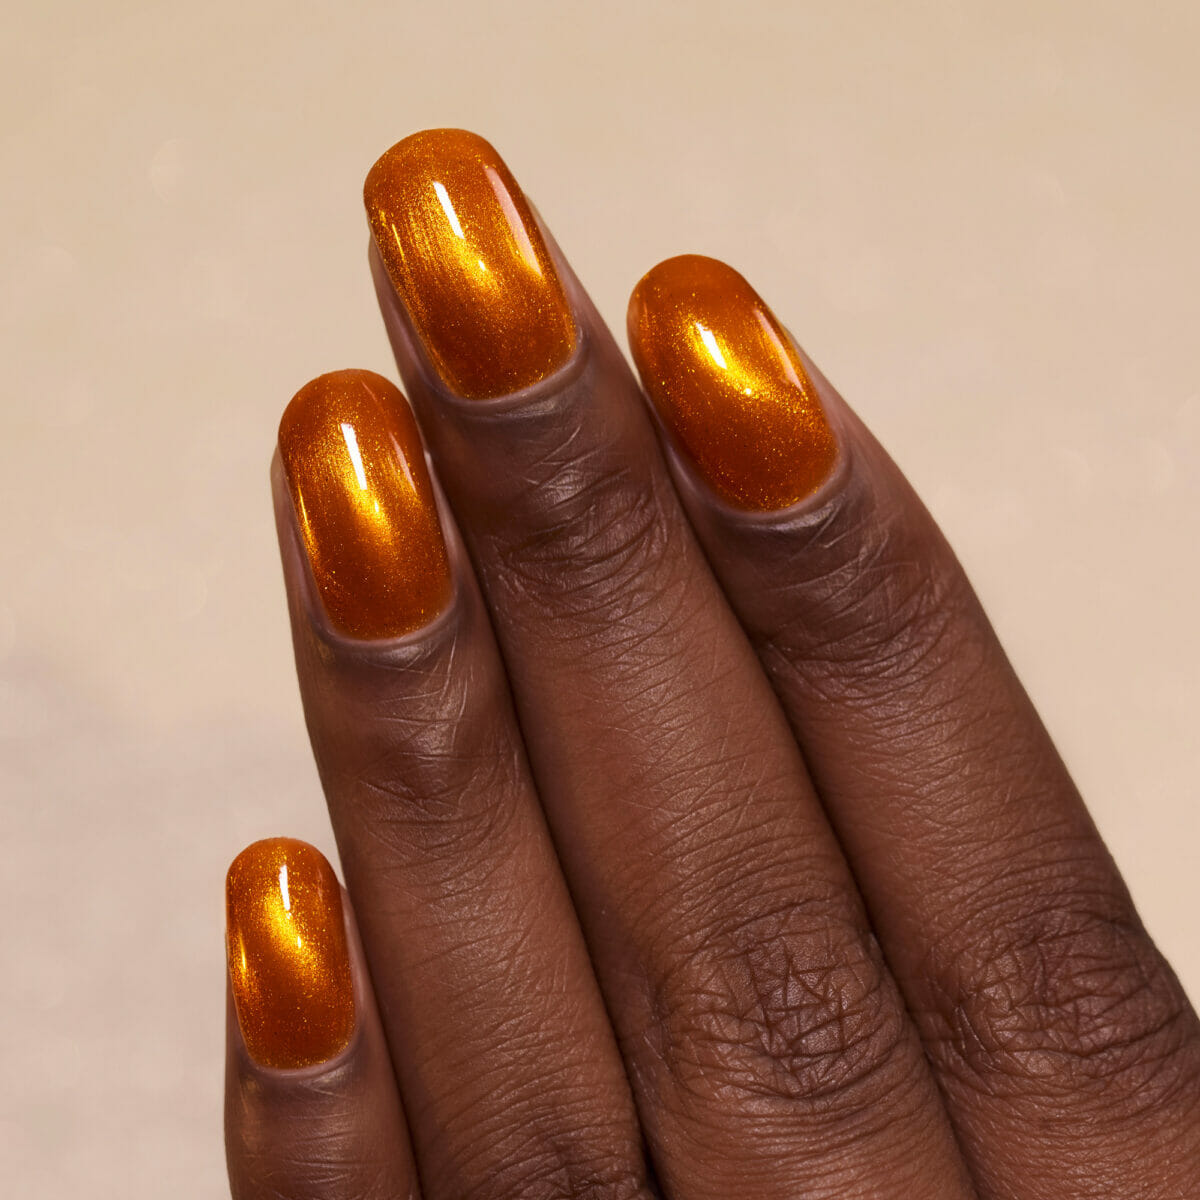 Amber - Warm Amber Magnetic Nail Polish by ILNP